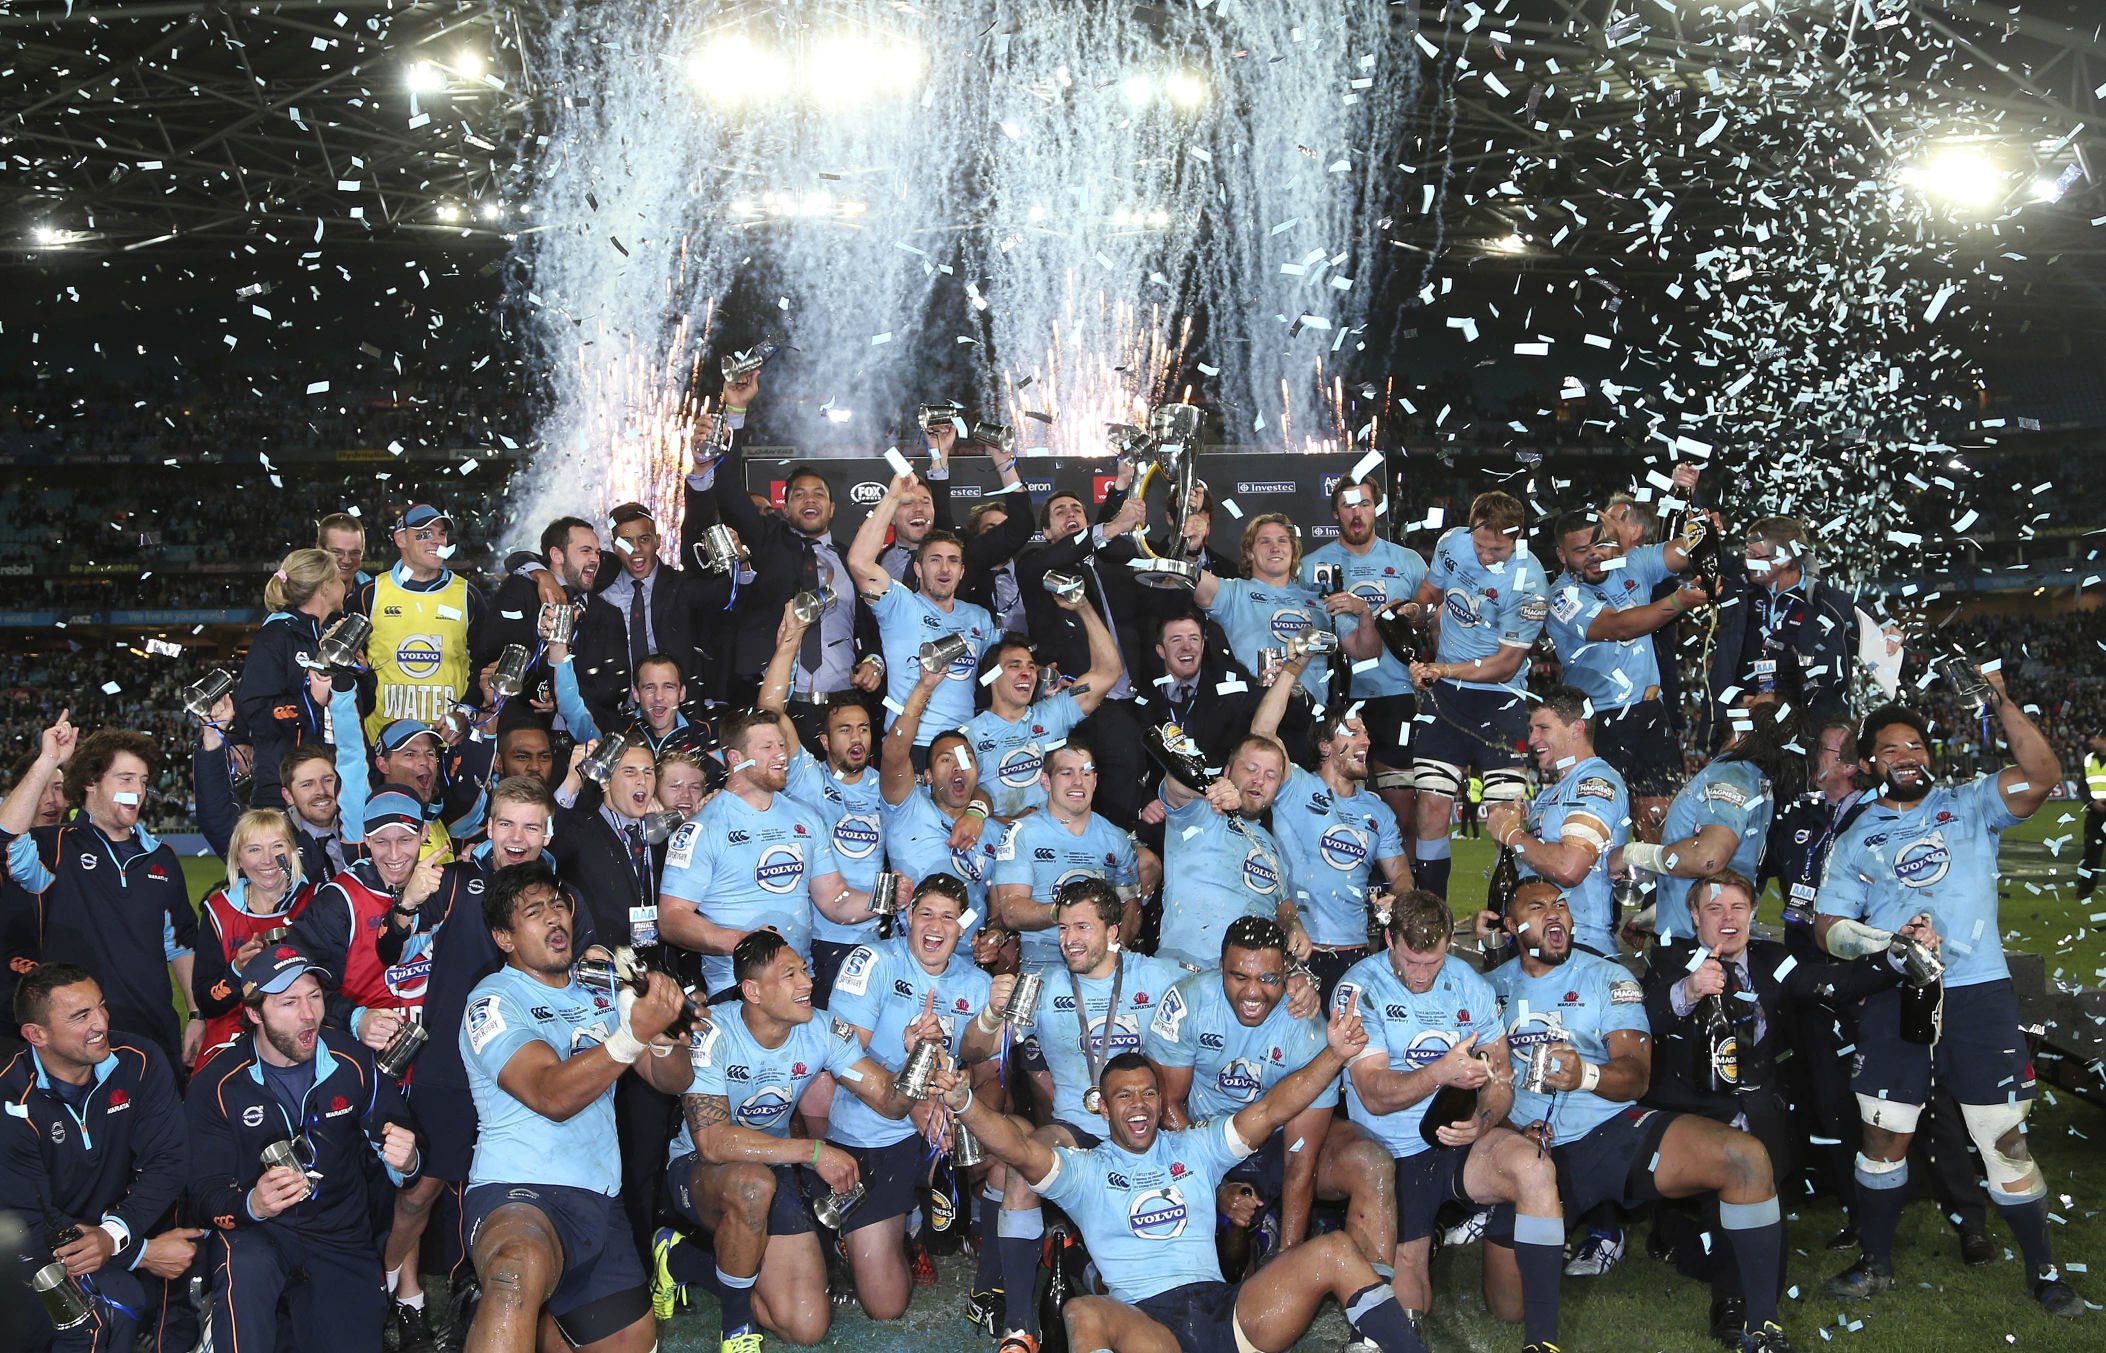 The Waratahs celebrate after defeating the Crusaders 33-32 in the Super Rugby final in Sydney. Photo: AP